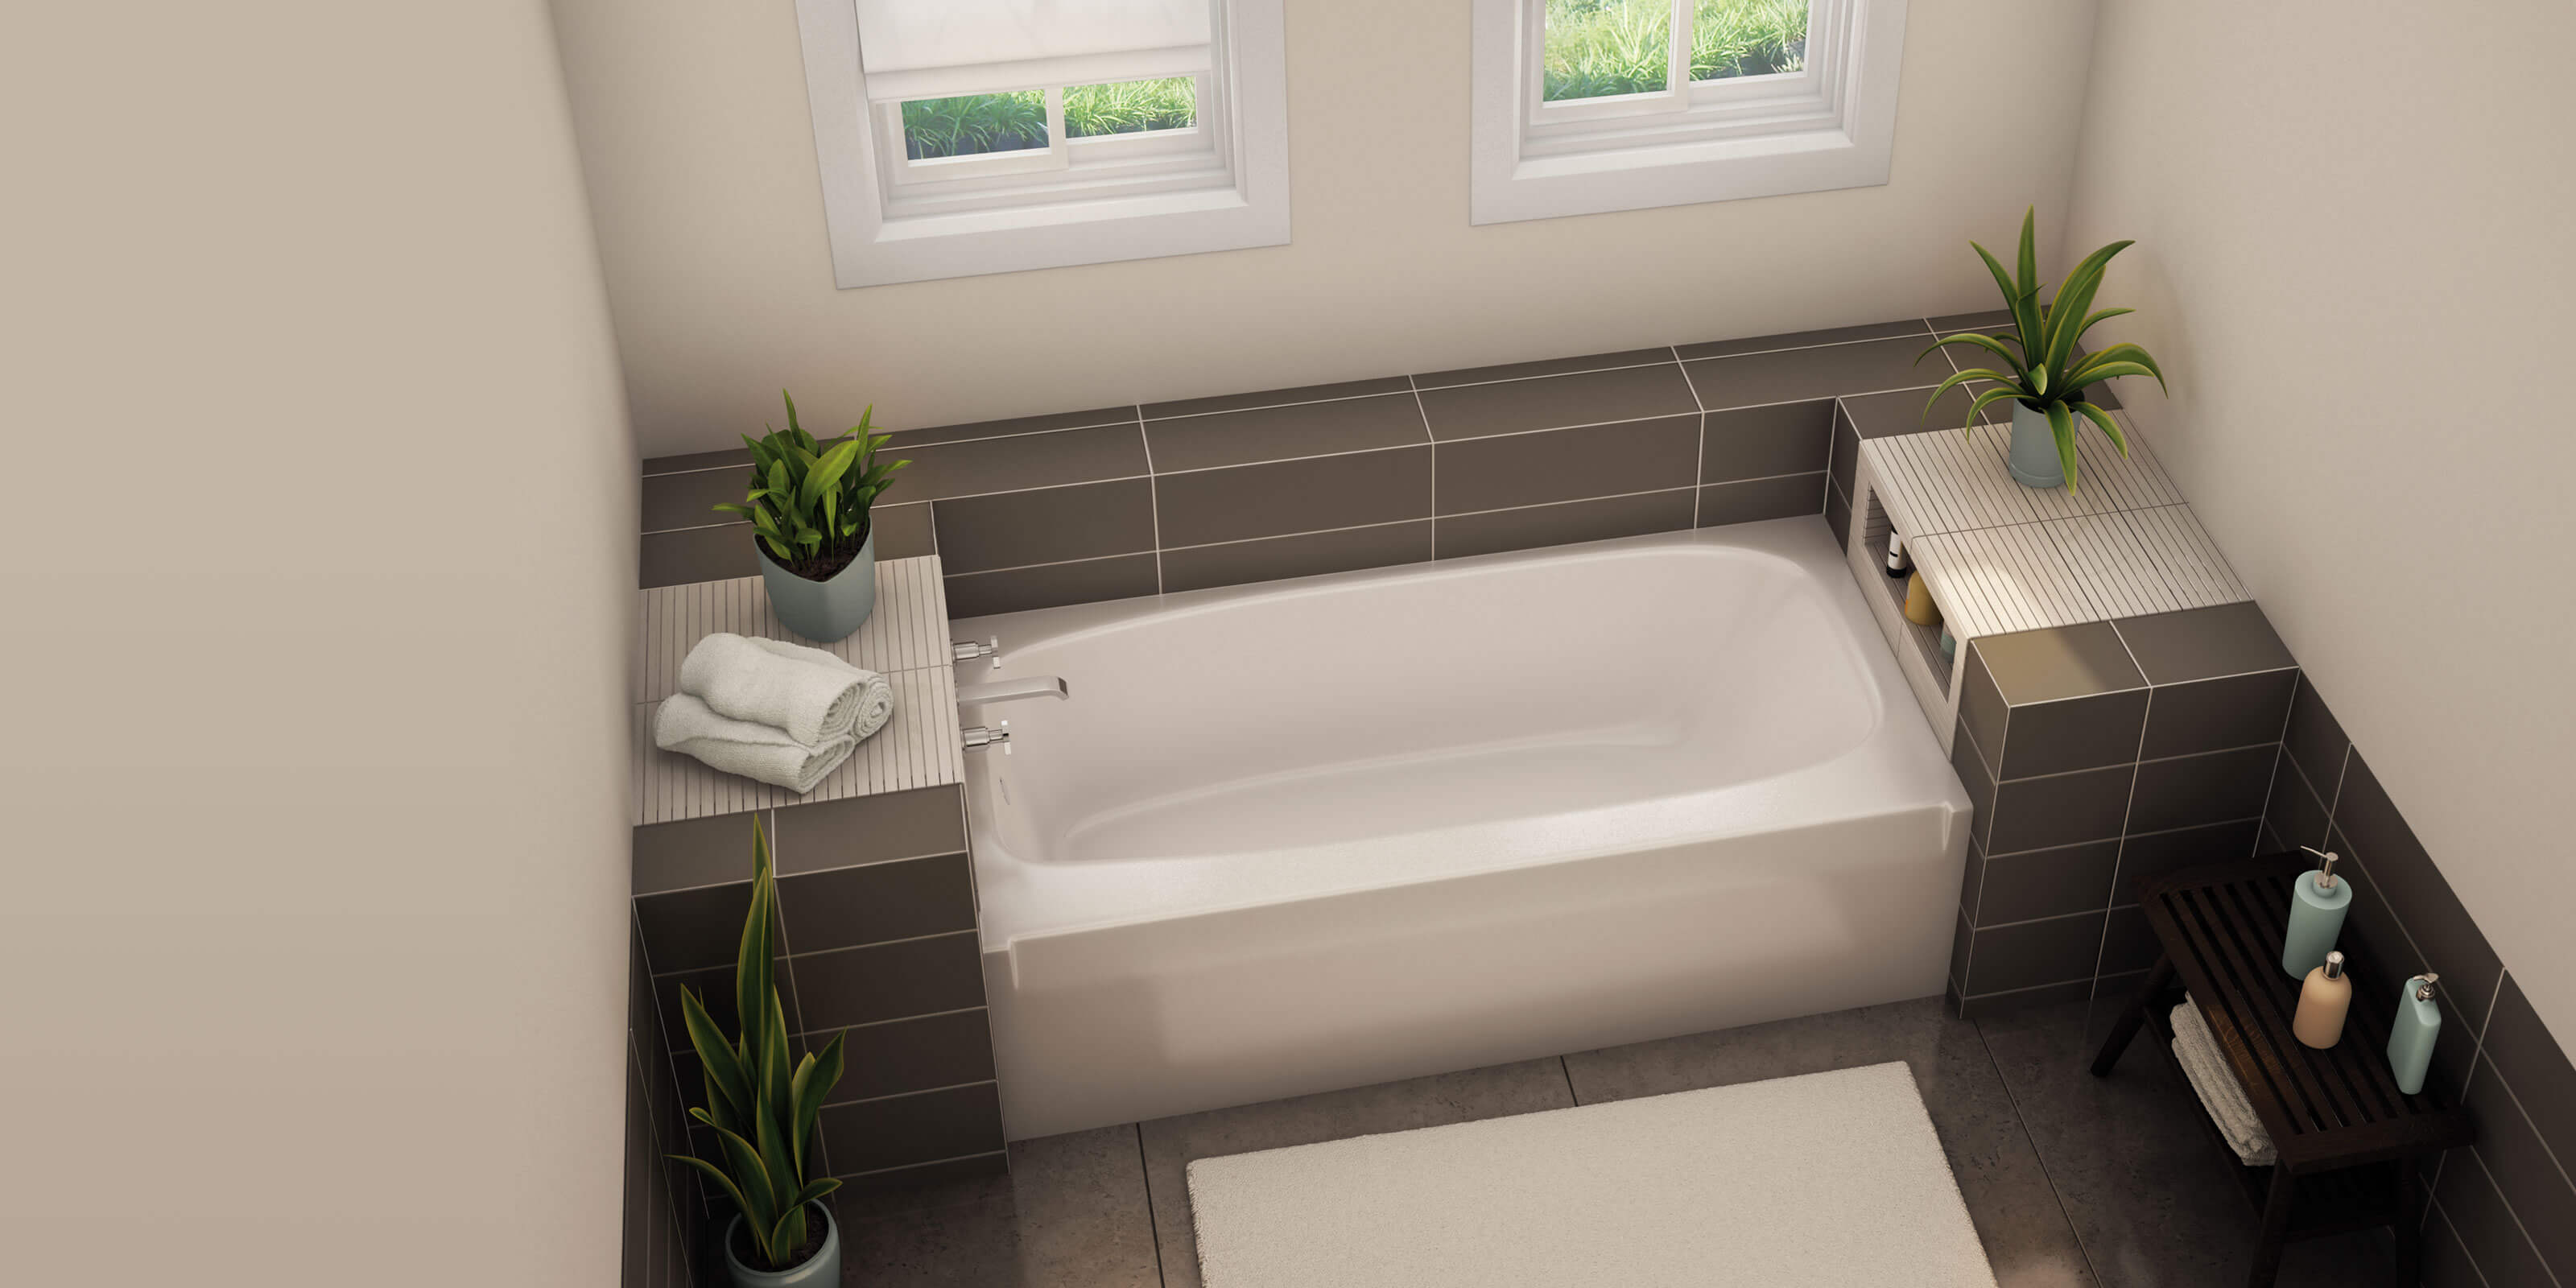 http://res.cloudinary.com/american-bath-group/image/upload/v1628106802/websites-product-info-and-content/aker/content/products/categories/bathtubs/aker-to-3060-bathtub-alcove-white.jpg